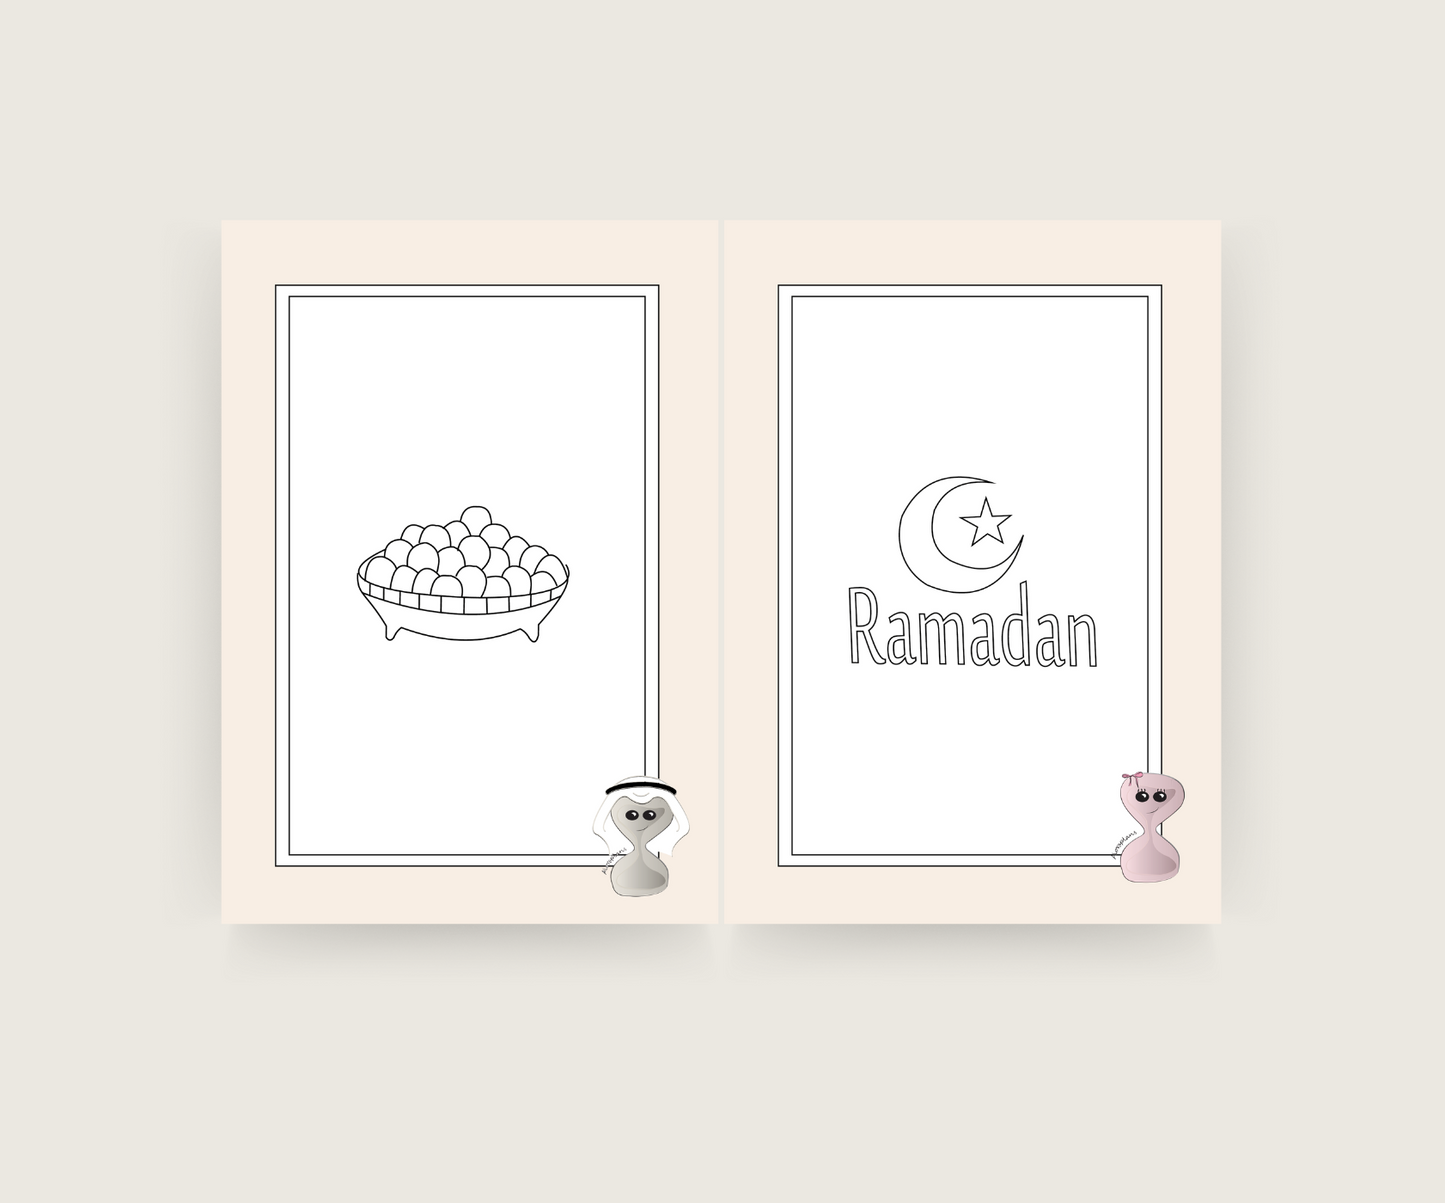 ramadan color book for kids 4-10 years old